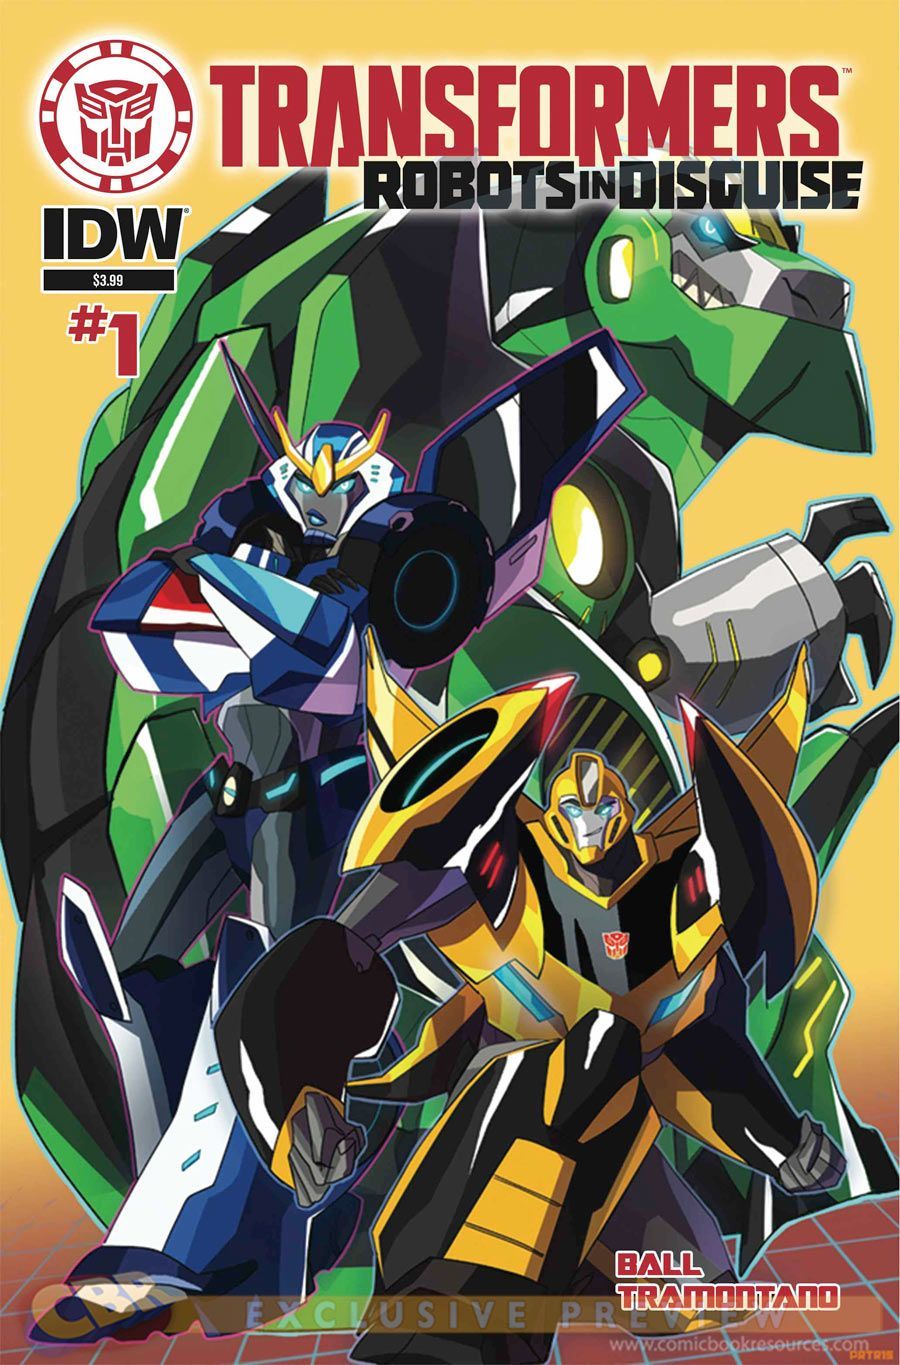 image for: EXCLUSIVE: IDW Sets Lineup for Transformers: Robots in Disguise Comic. Transformer robots, Transformers, Comics